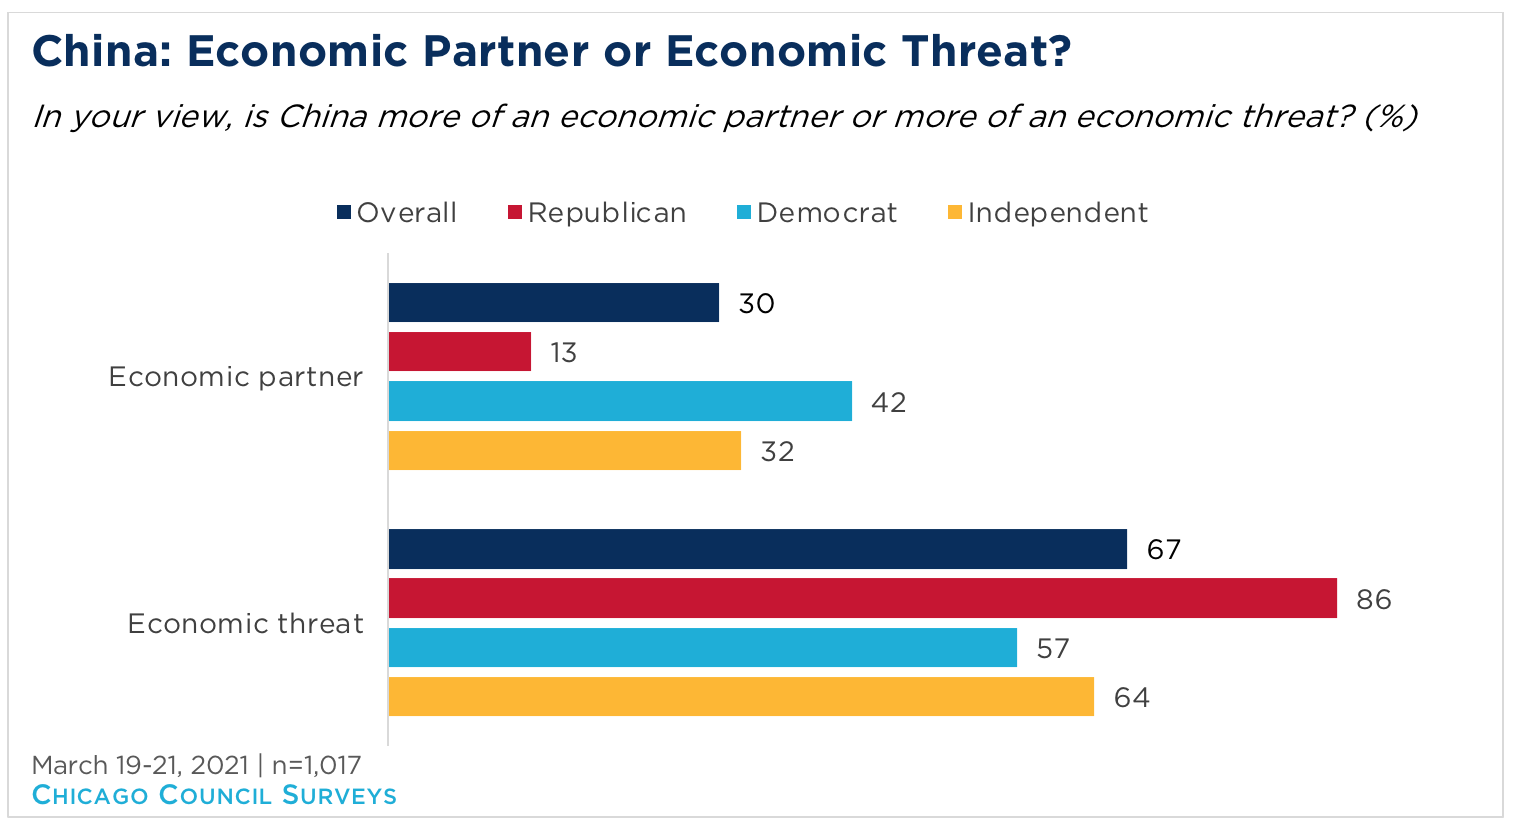 Bar graph showing partisan opinion on whether China is an economic partner or threat.